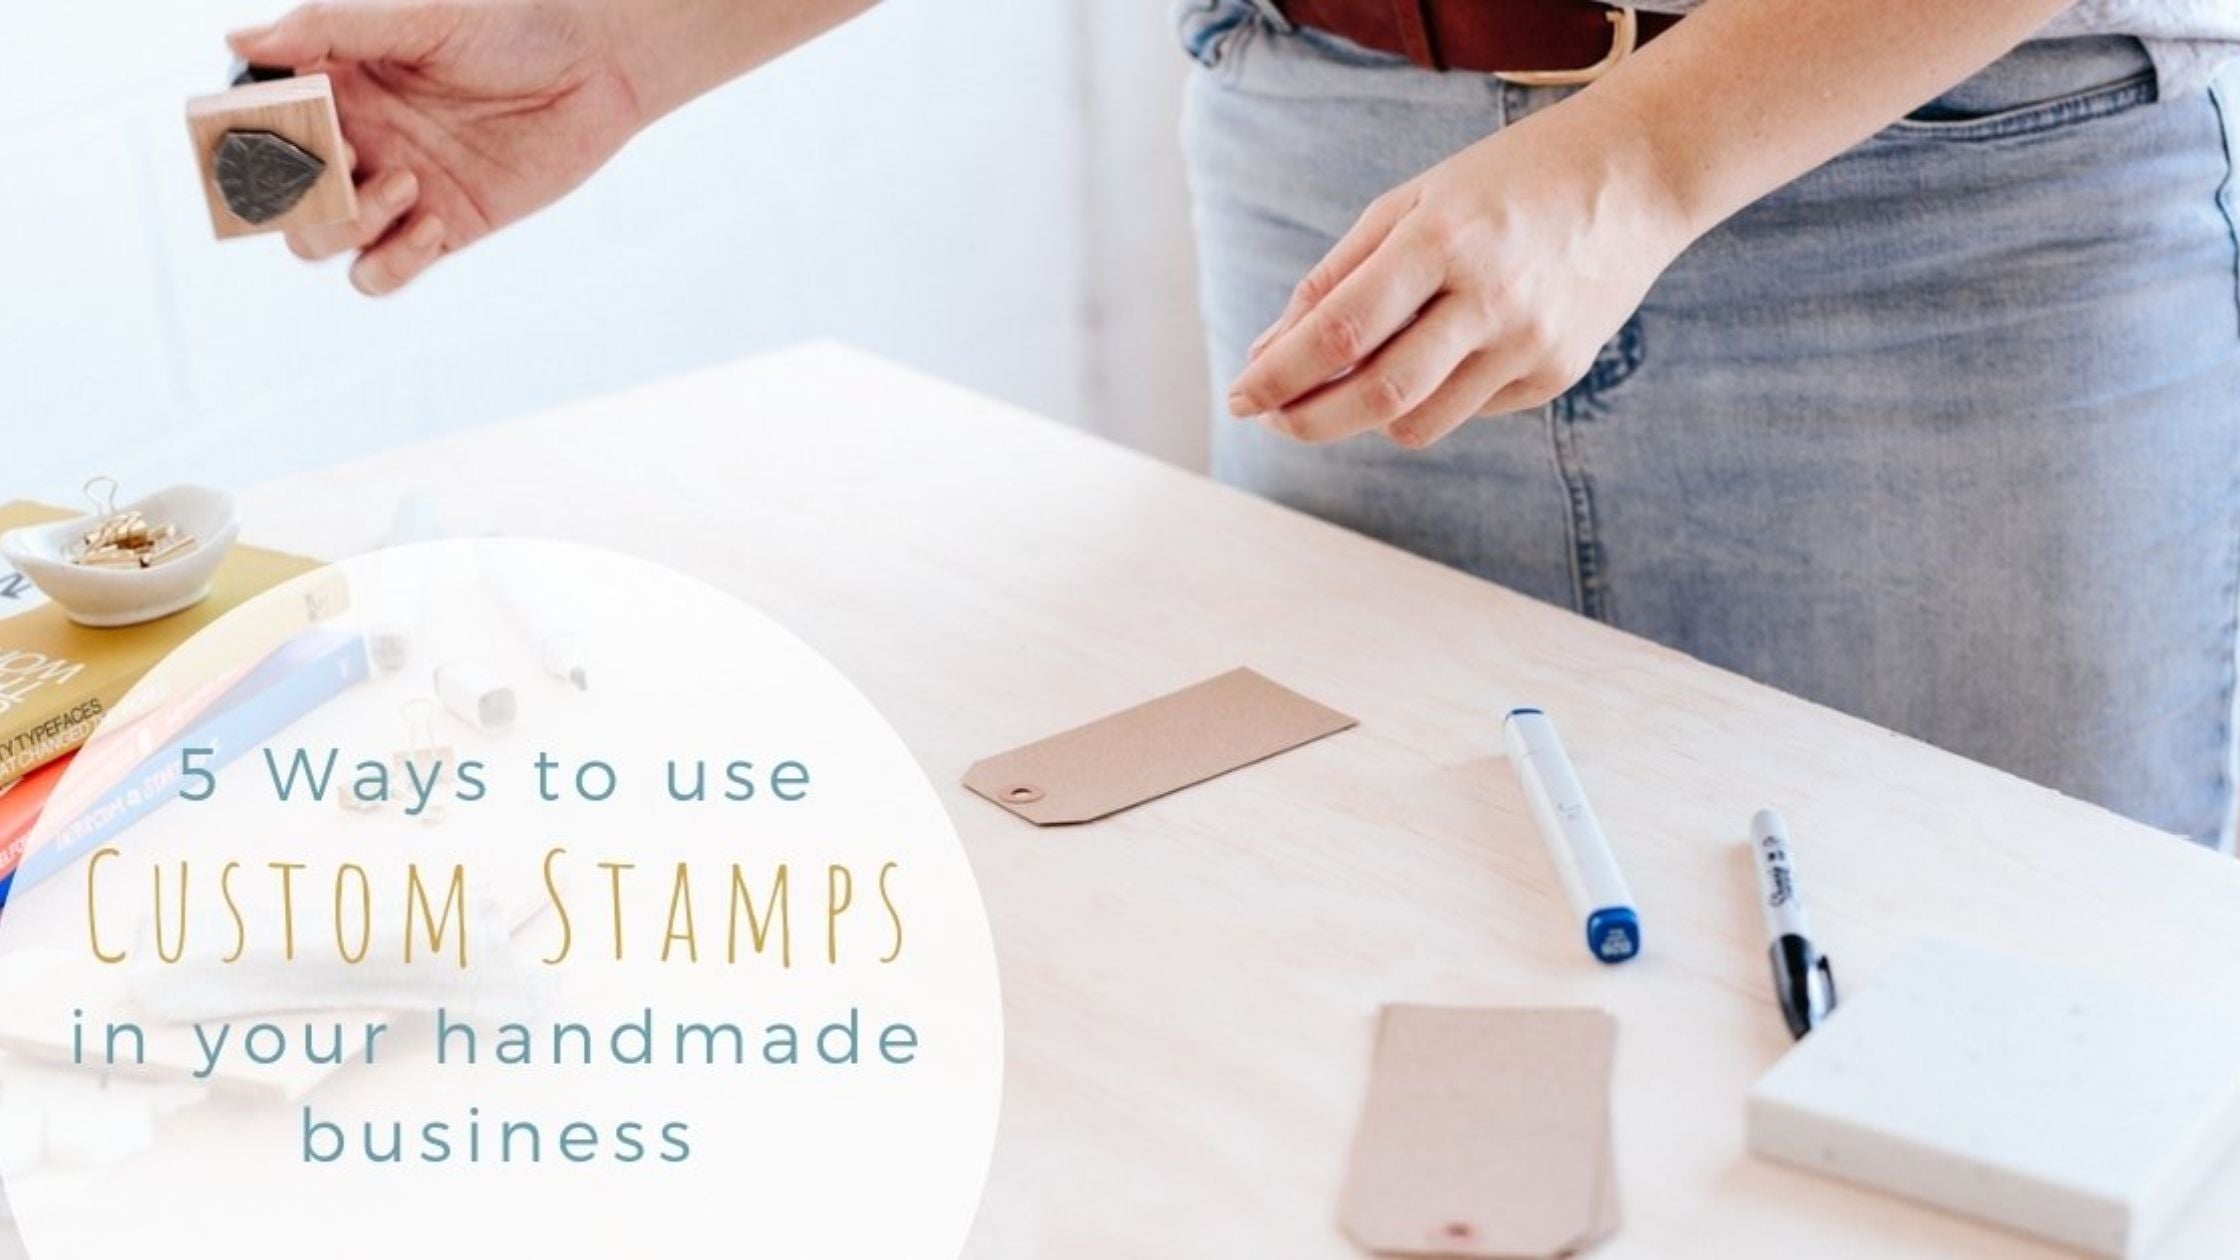 5 Ways to use custom stamps in your handmade business